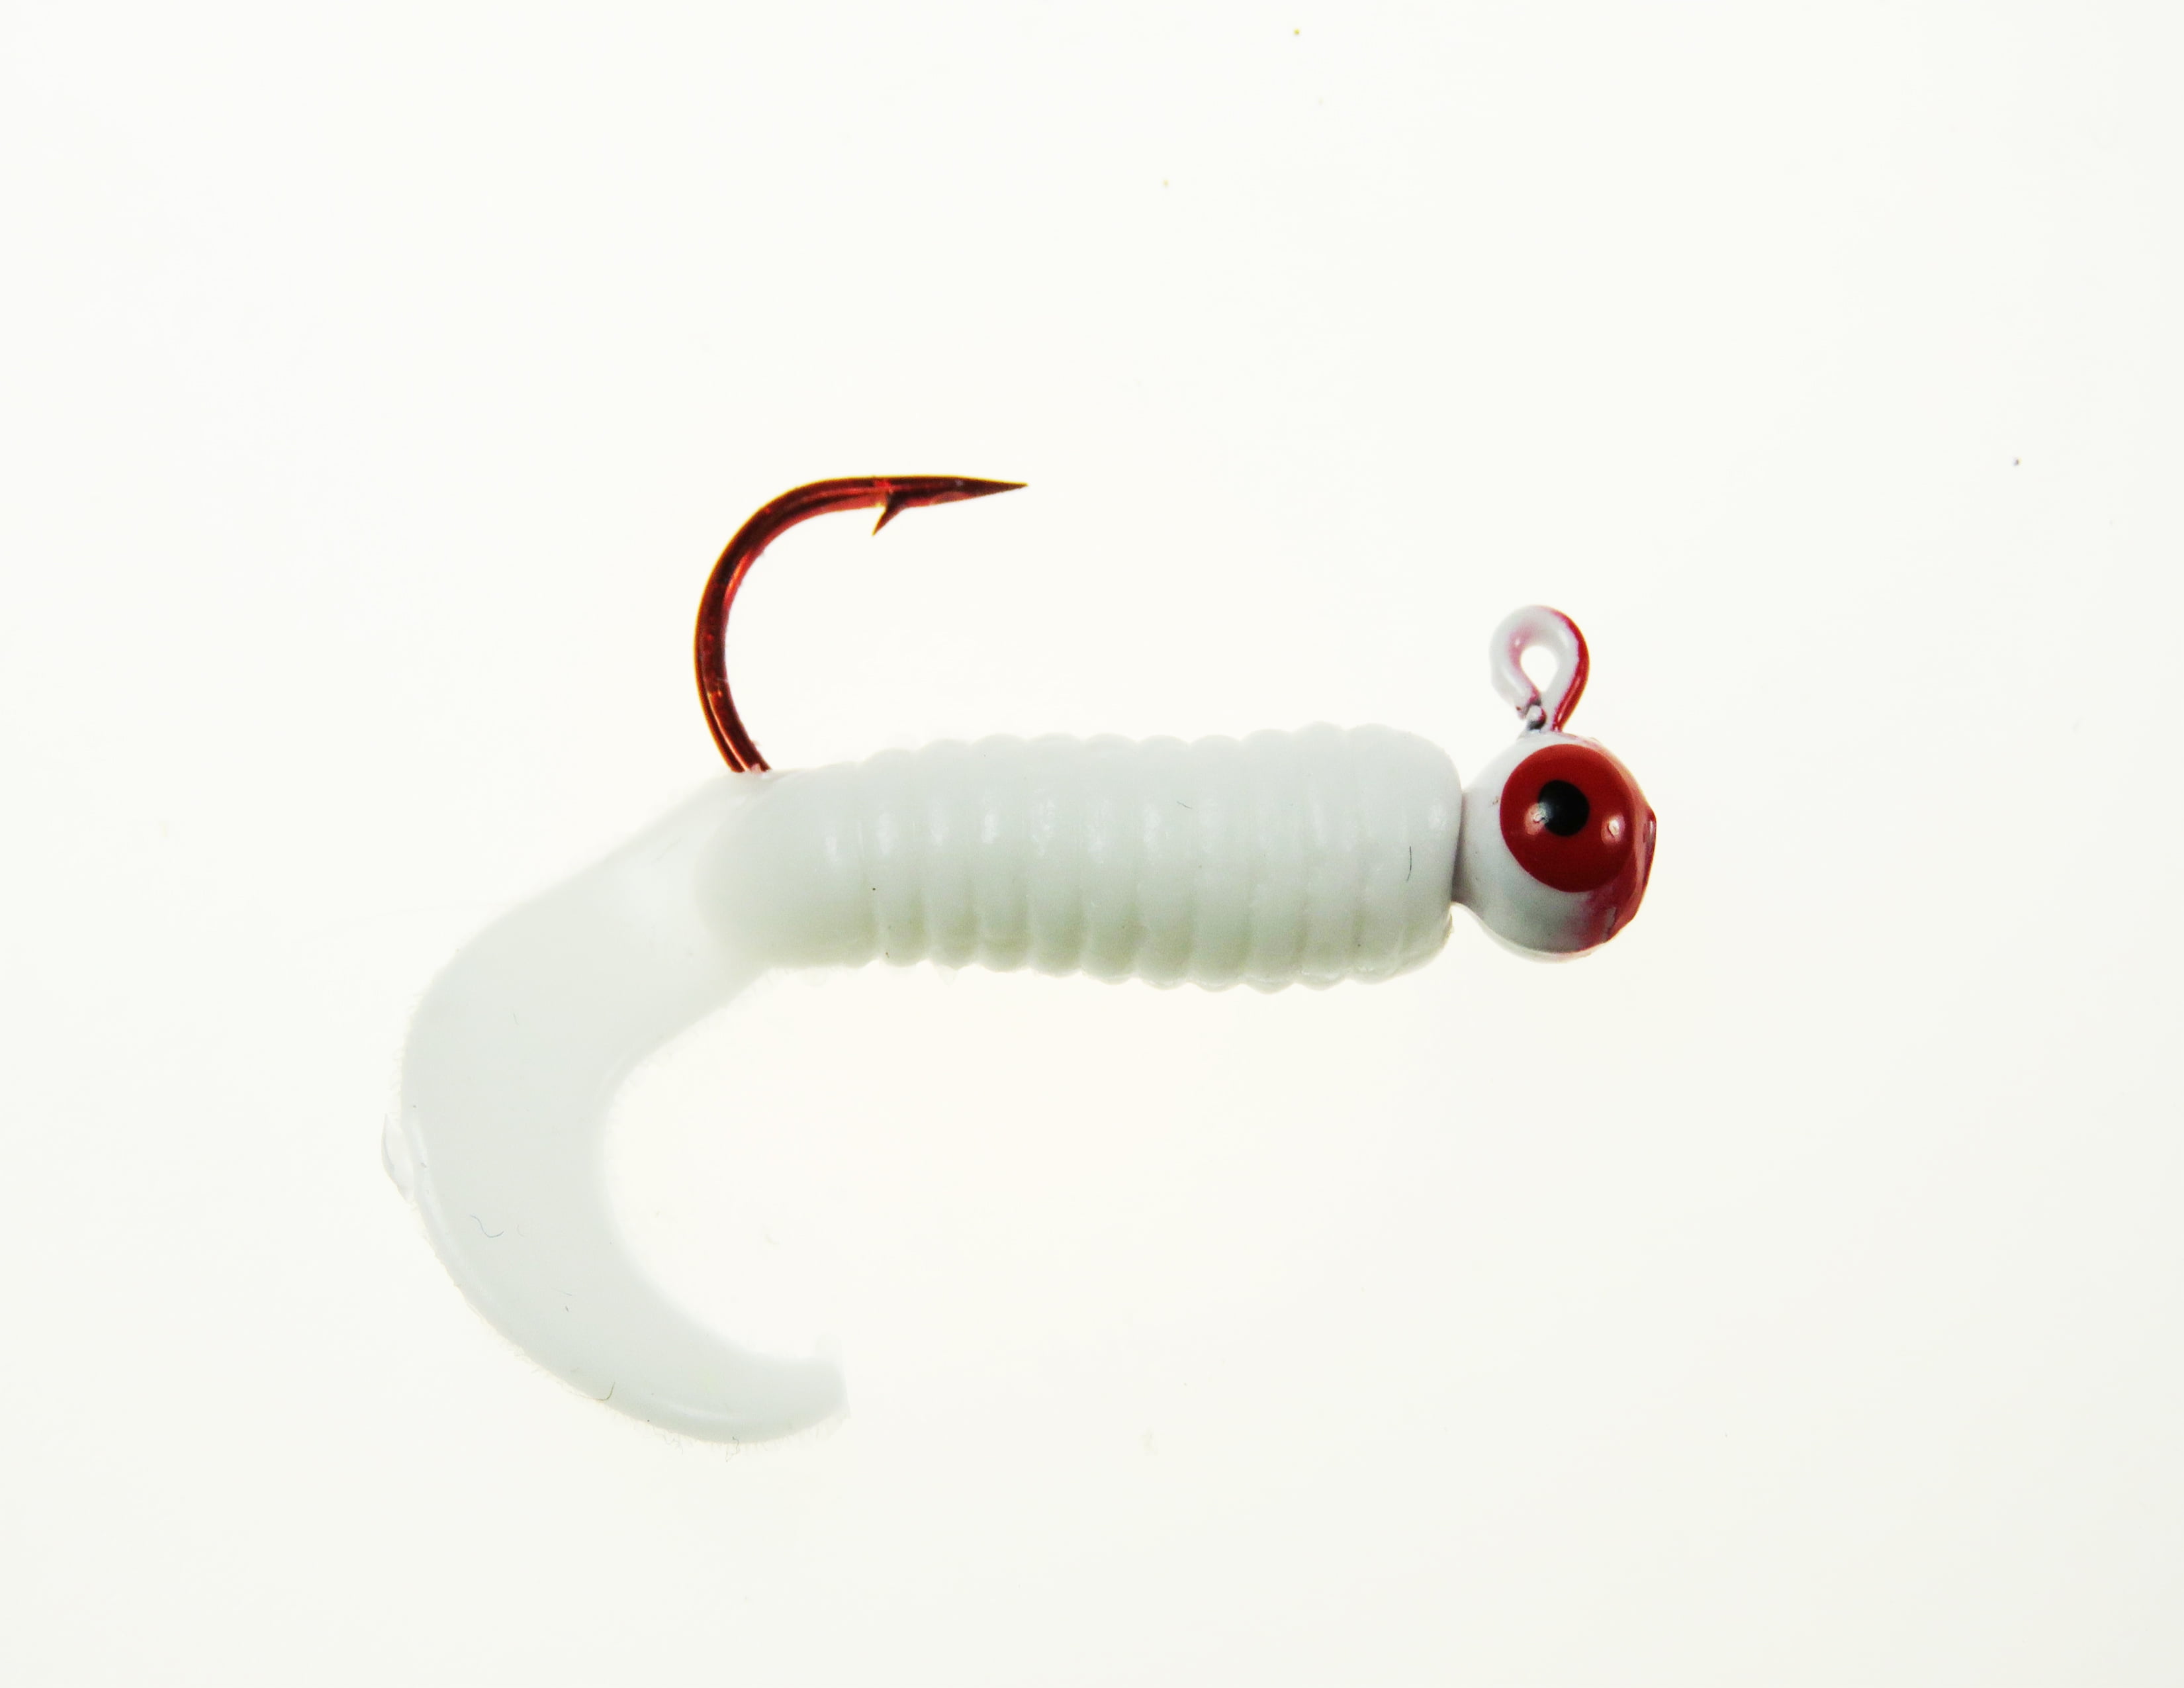 1/16 oz Lethal Glow Creep Worm Curved Tip Hook Crappie Fishing Lot of 20 B24